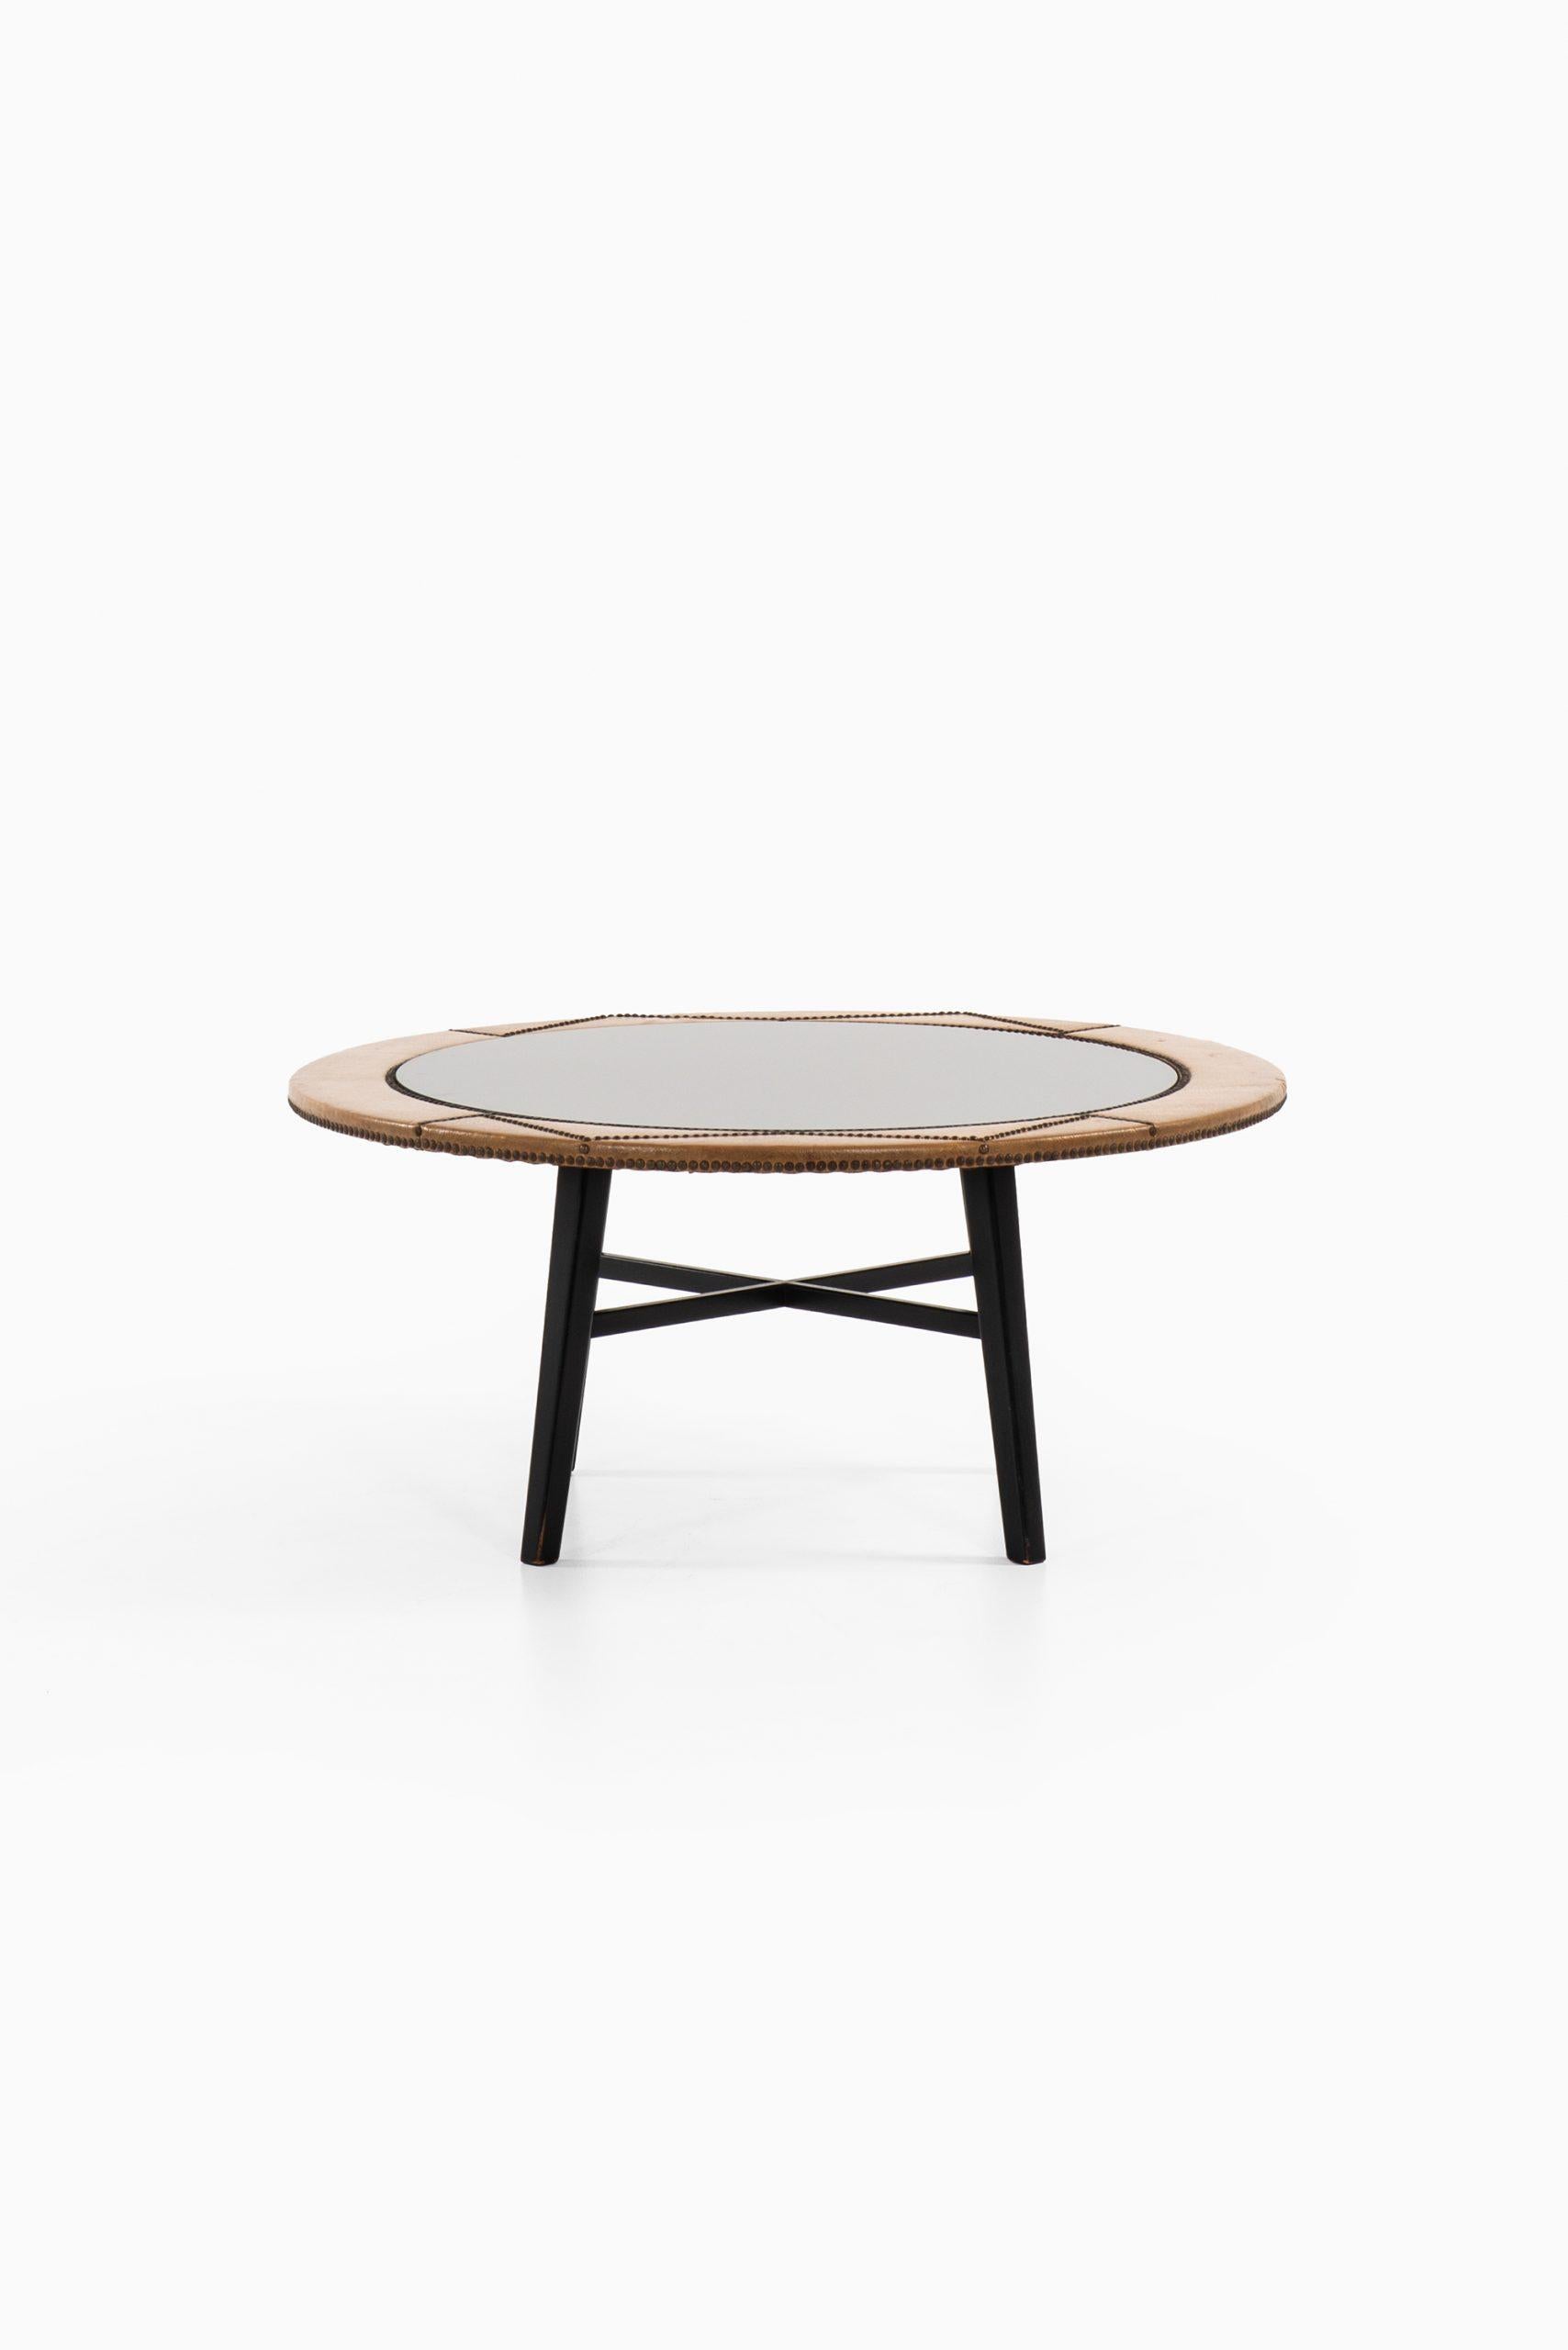 Rare coffee table designed by Otto Schulz. Produced by Boet in Sweden.